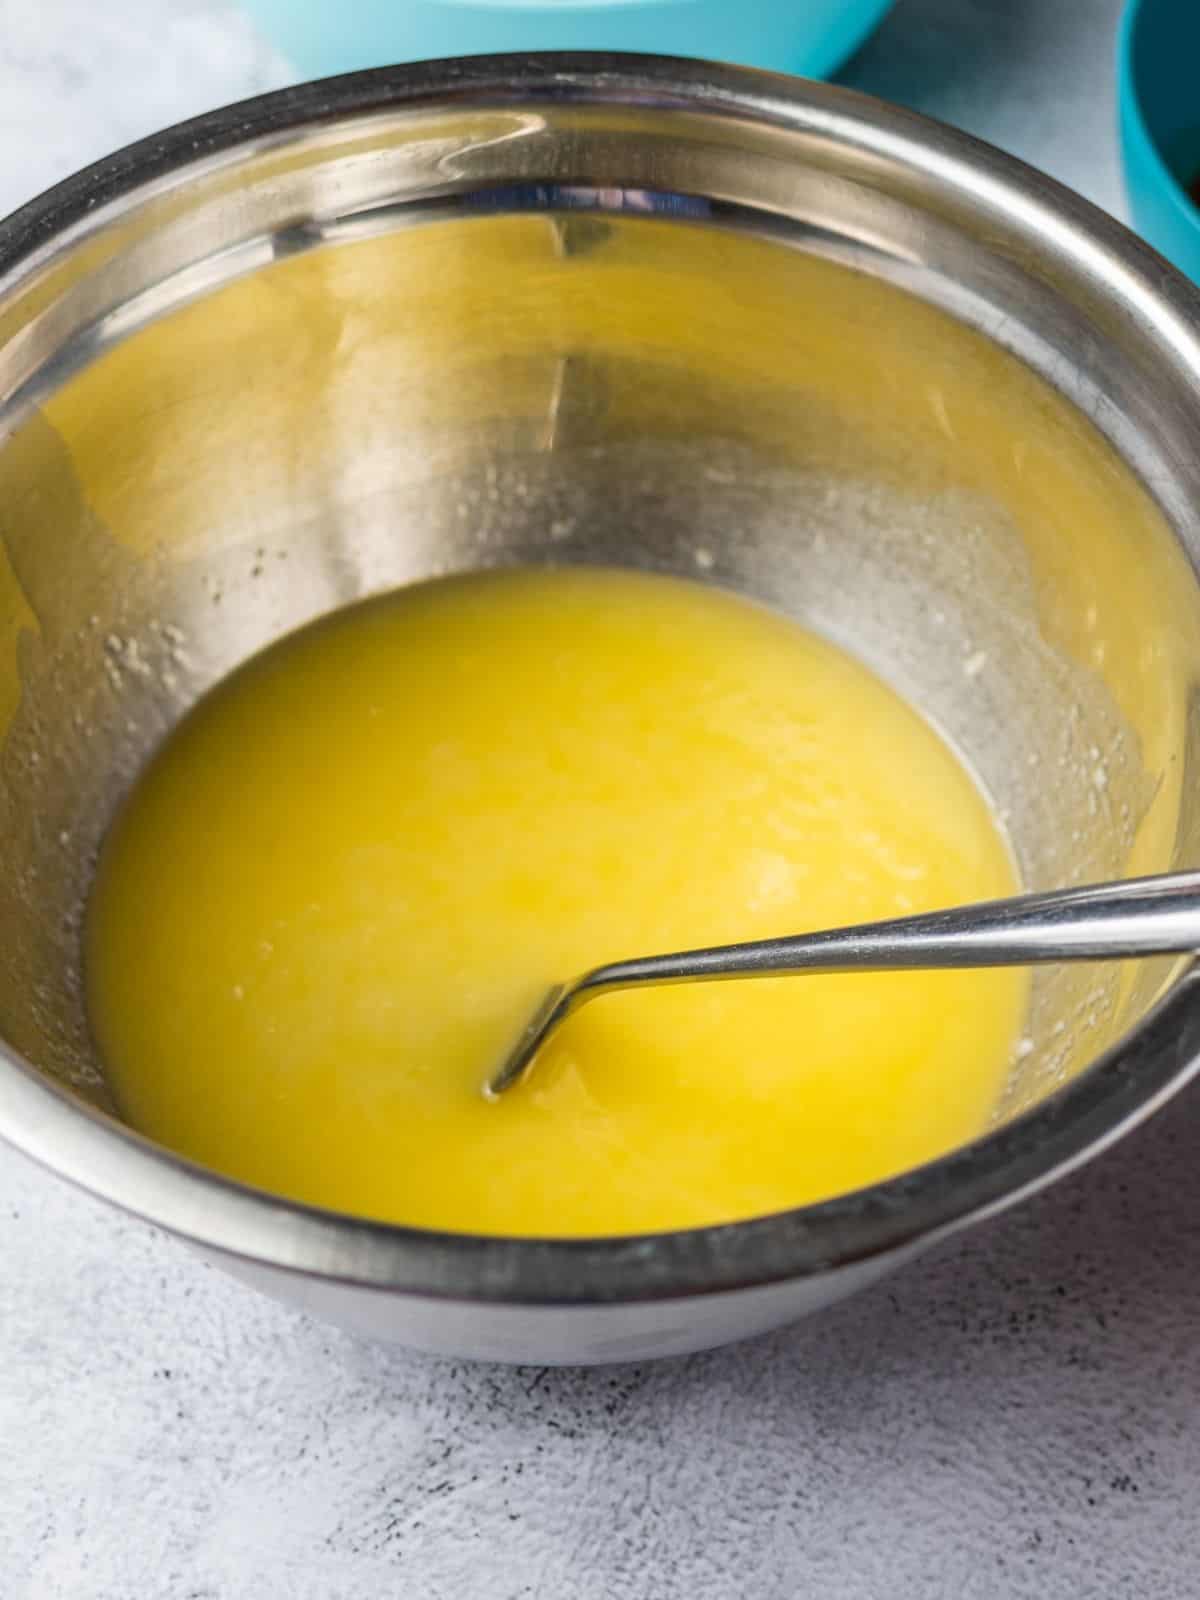 melted butter in bowl.